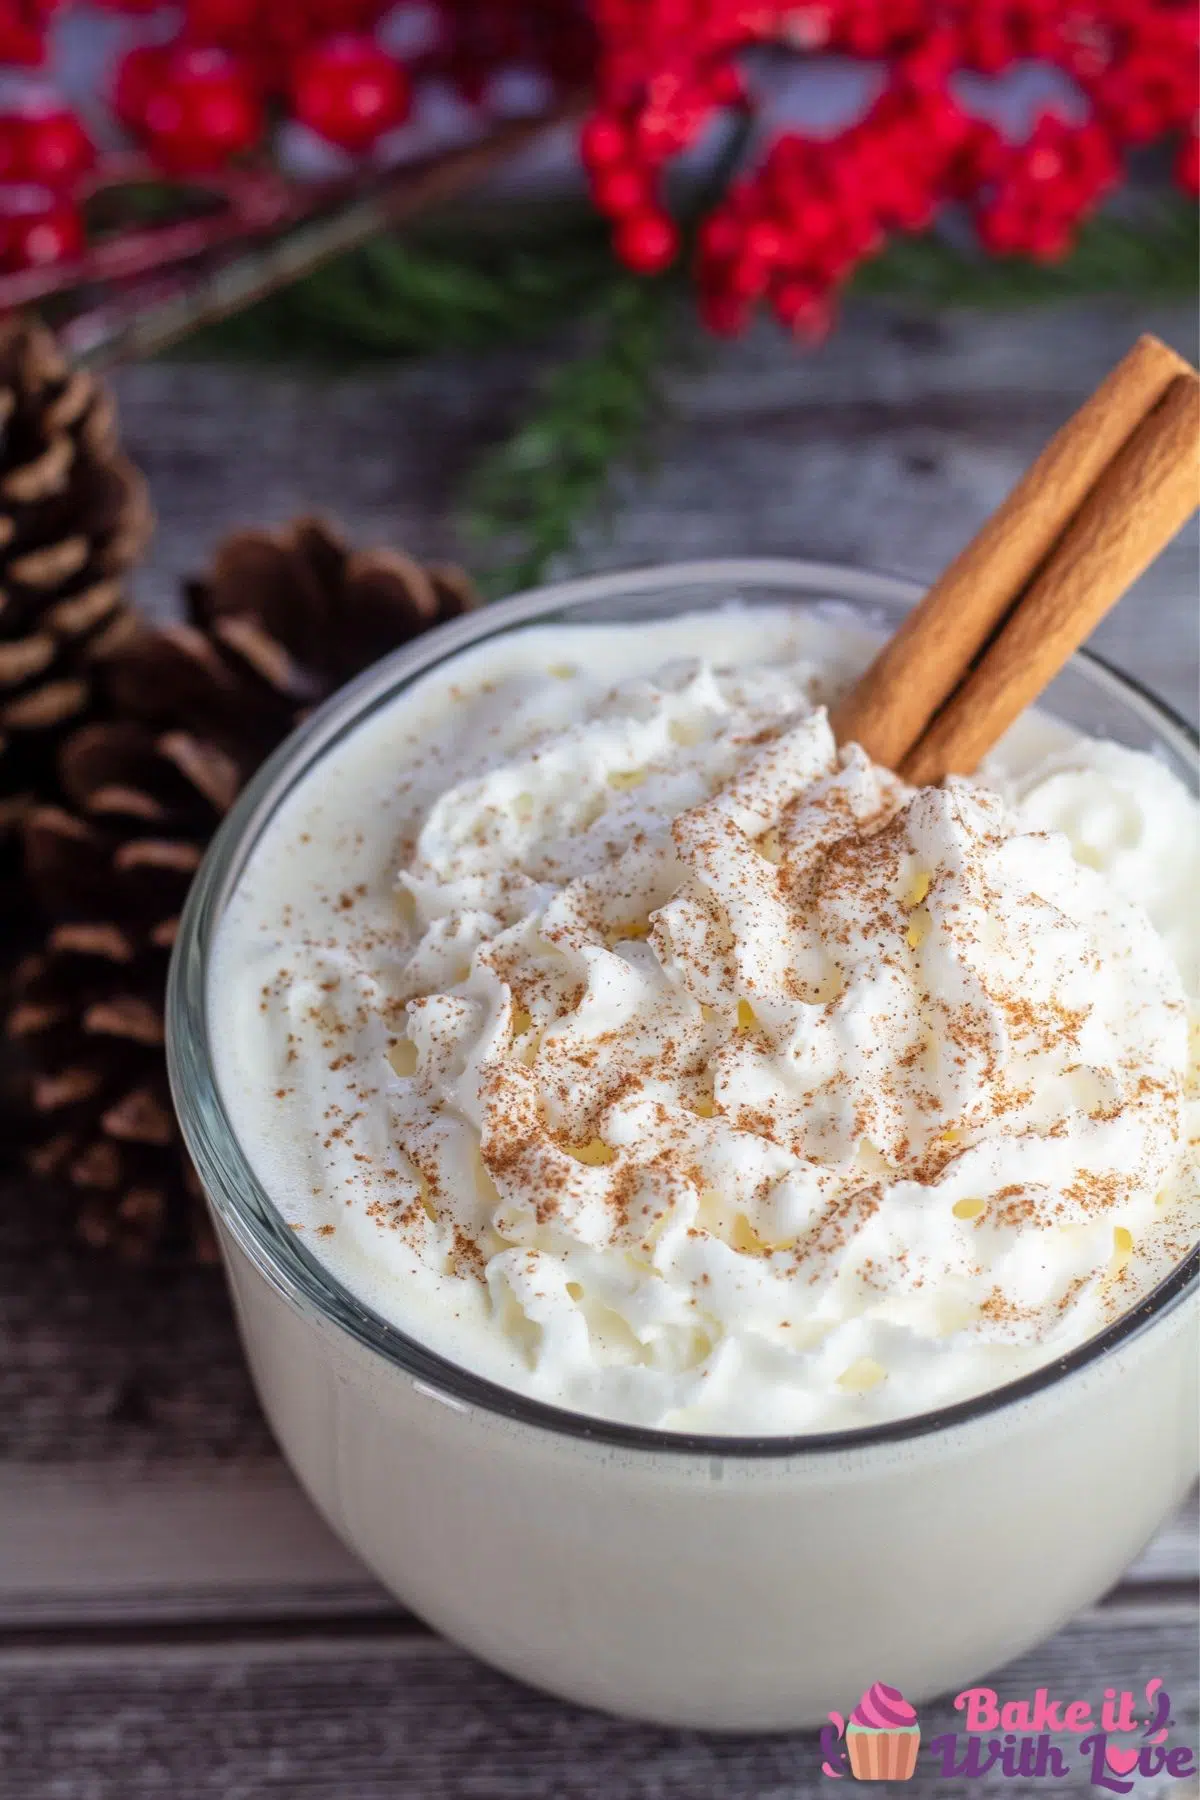 Tasty homemade eggnog in mug with pinecones and holly decor.